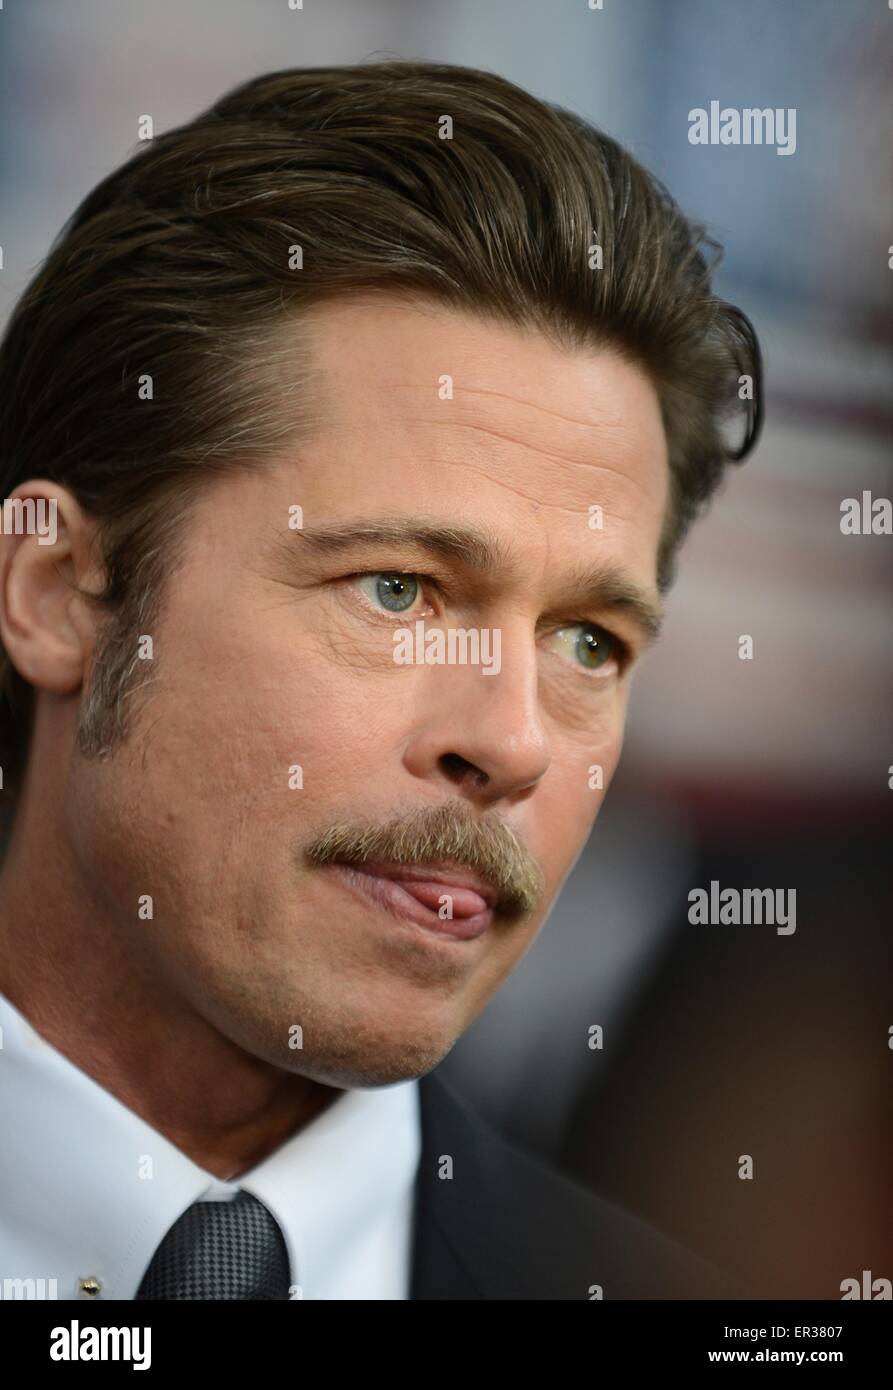 Actor Brad Pitt at the premier of the blockbuster movie Fury at the Newseum  October 21, 2014 in Washington D.C Stock Photo - Alamy